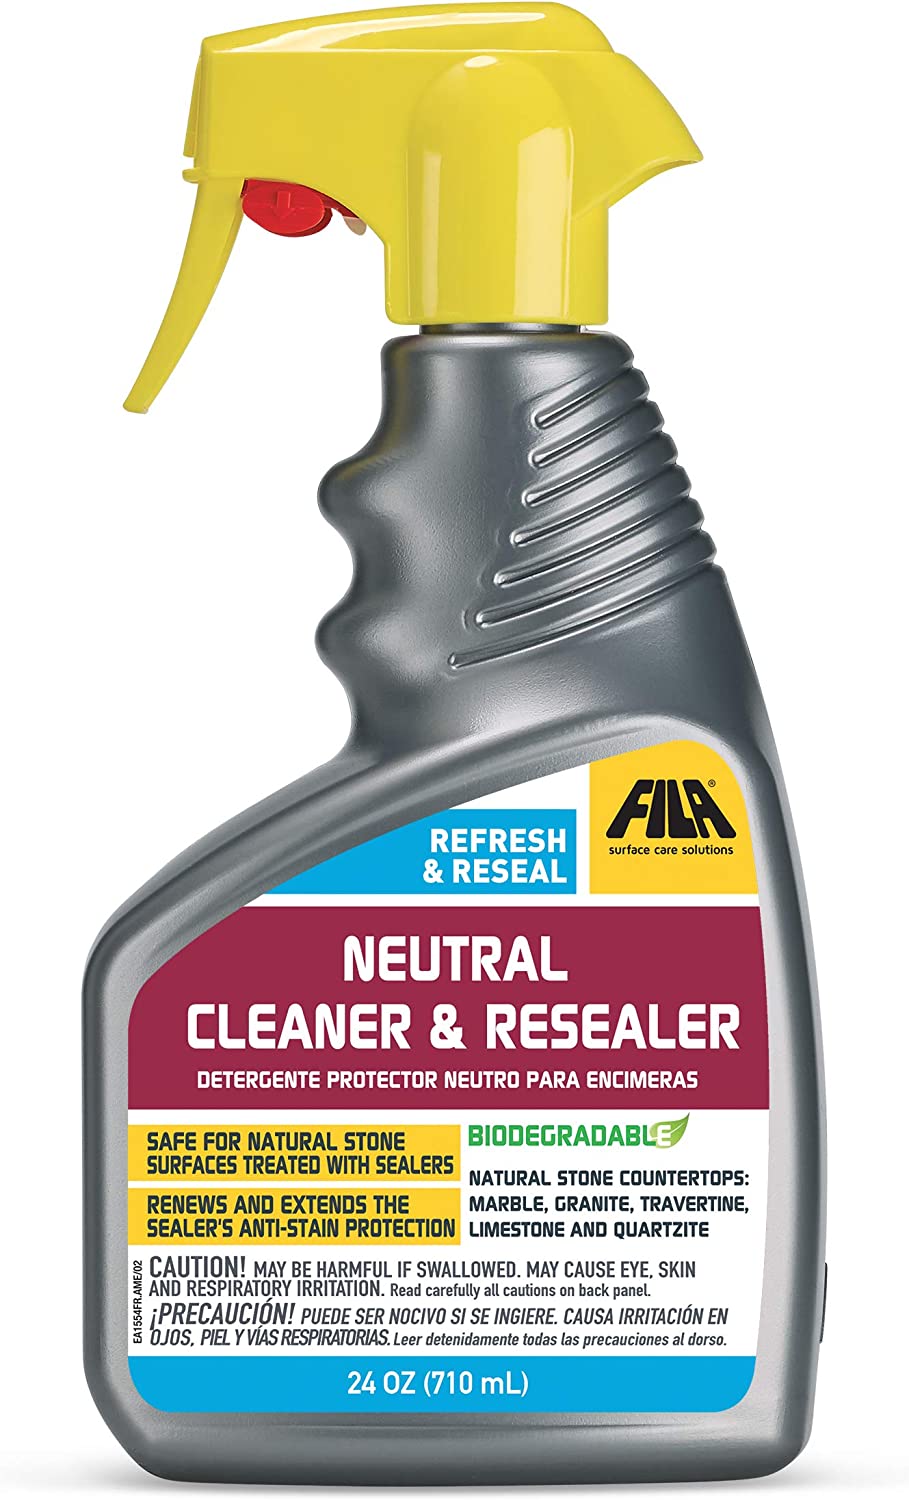 FILA Surface Care Solutions REFRESH & RESEAL [...]